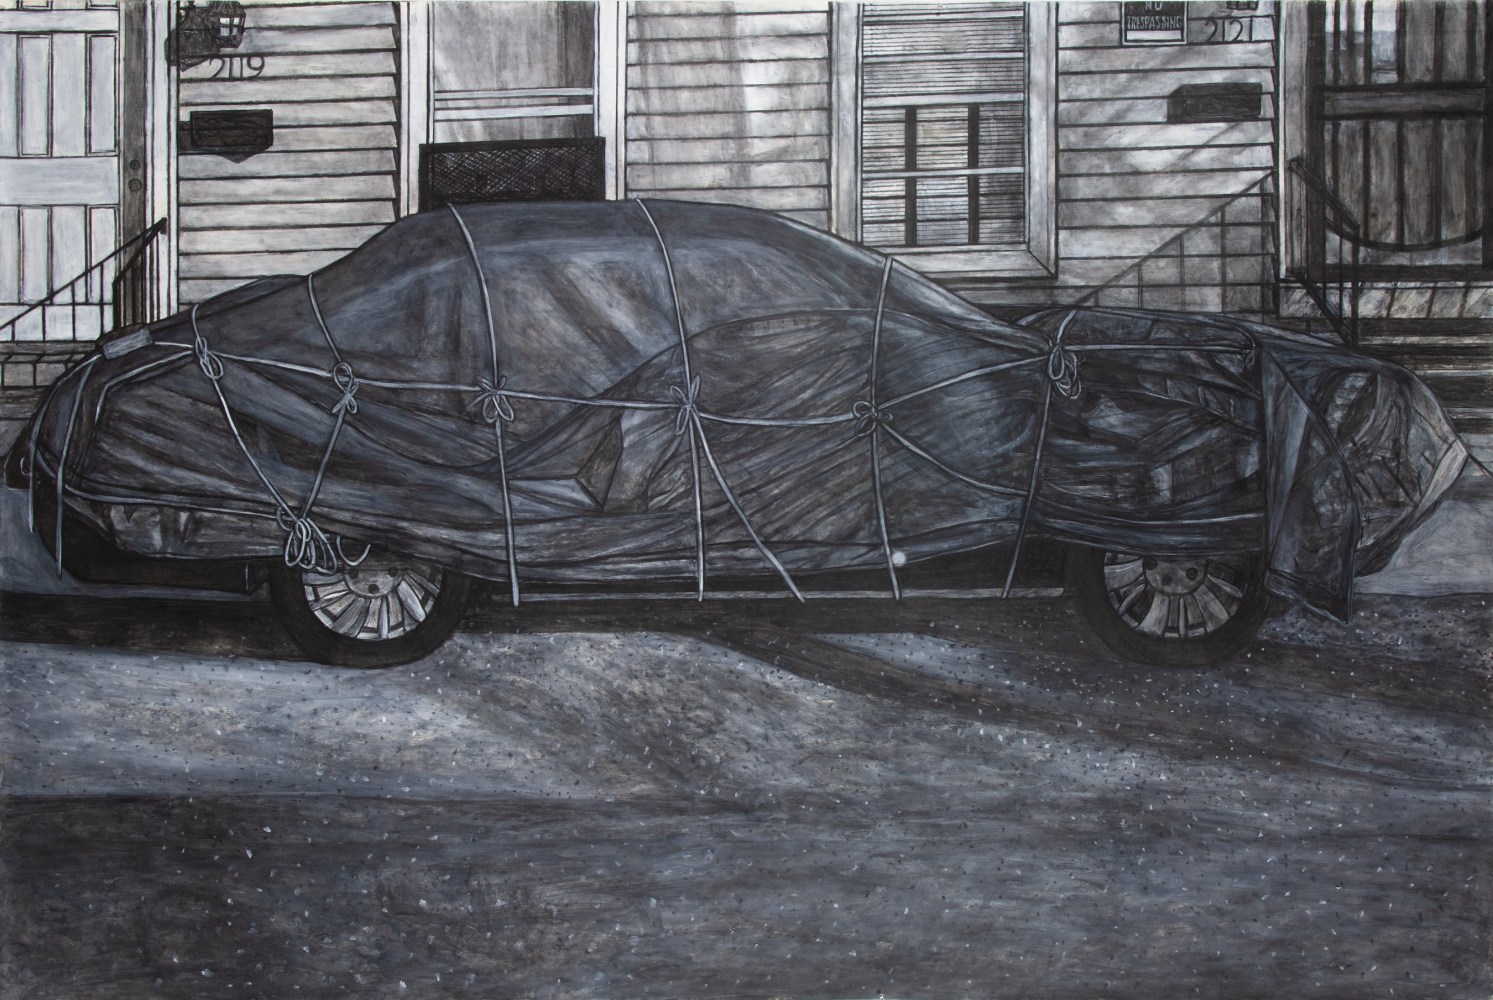 Willie Birch
Covering, 2015
Acrylic and charcoal on paper
60.5 x 90&amp;nbsp;inches&amp;nbsp;